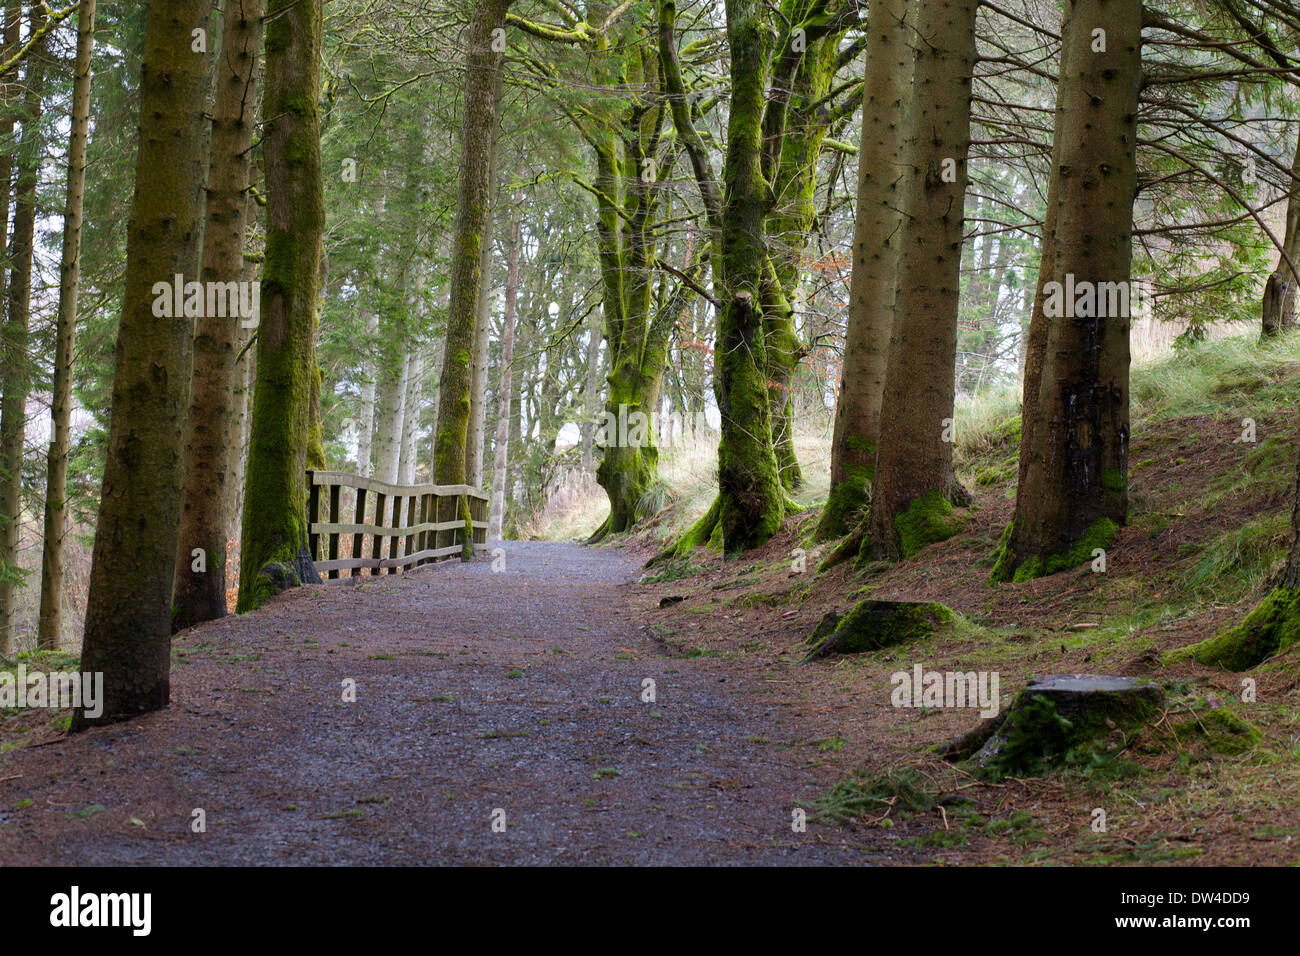 image of part of the Lakeside Way at Kielder Reservoir Stock Photo